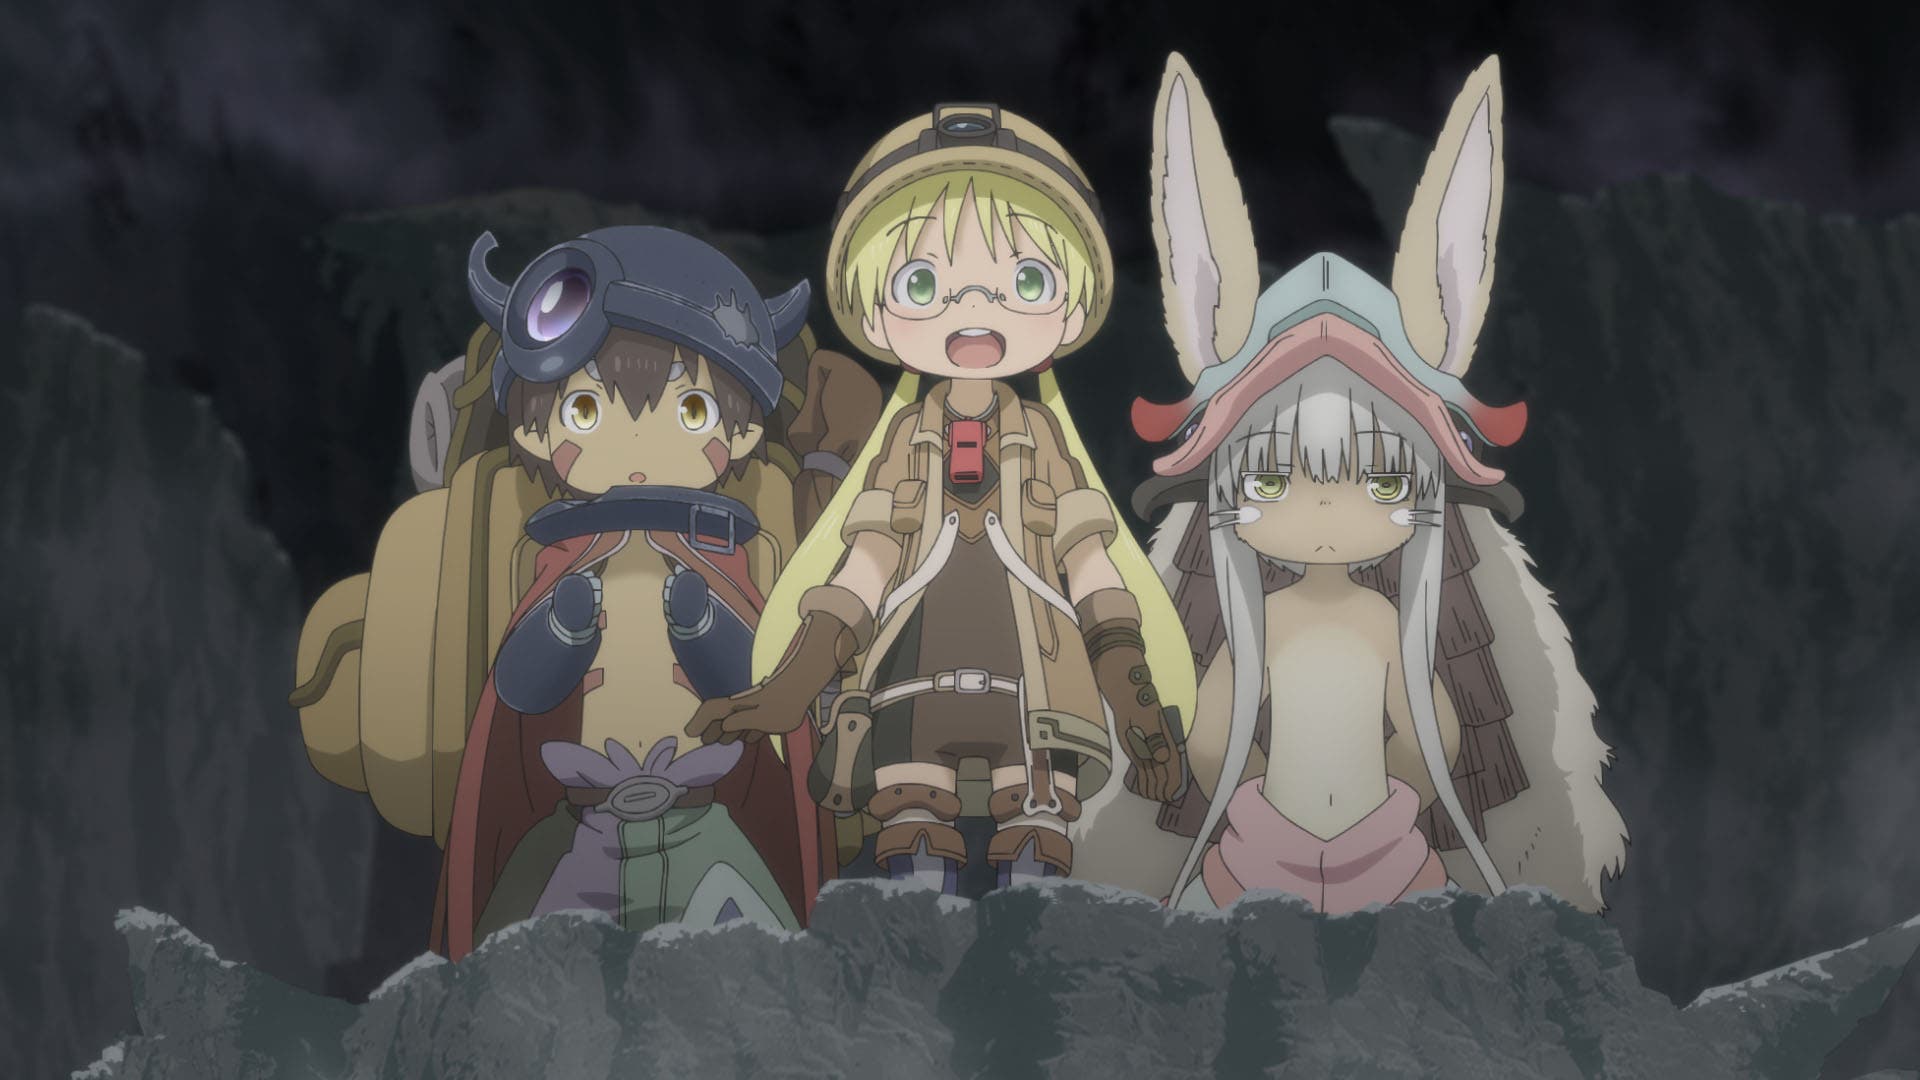 Made in Abyss anime